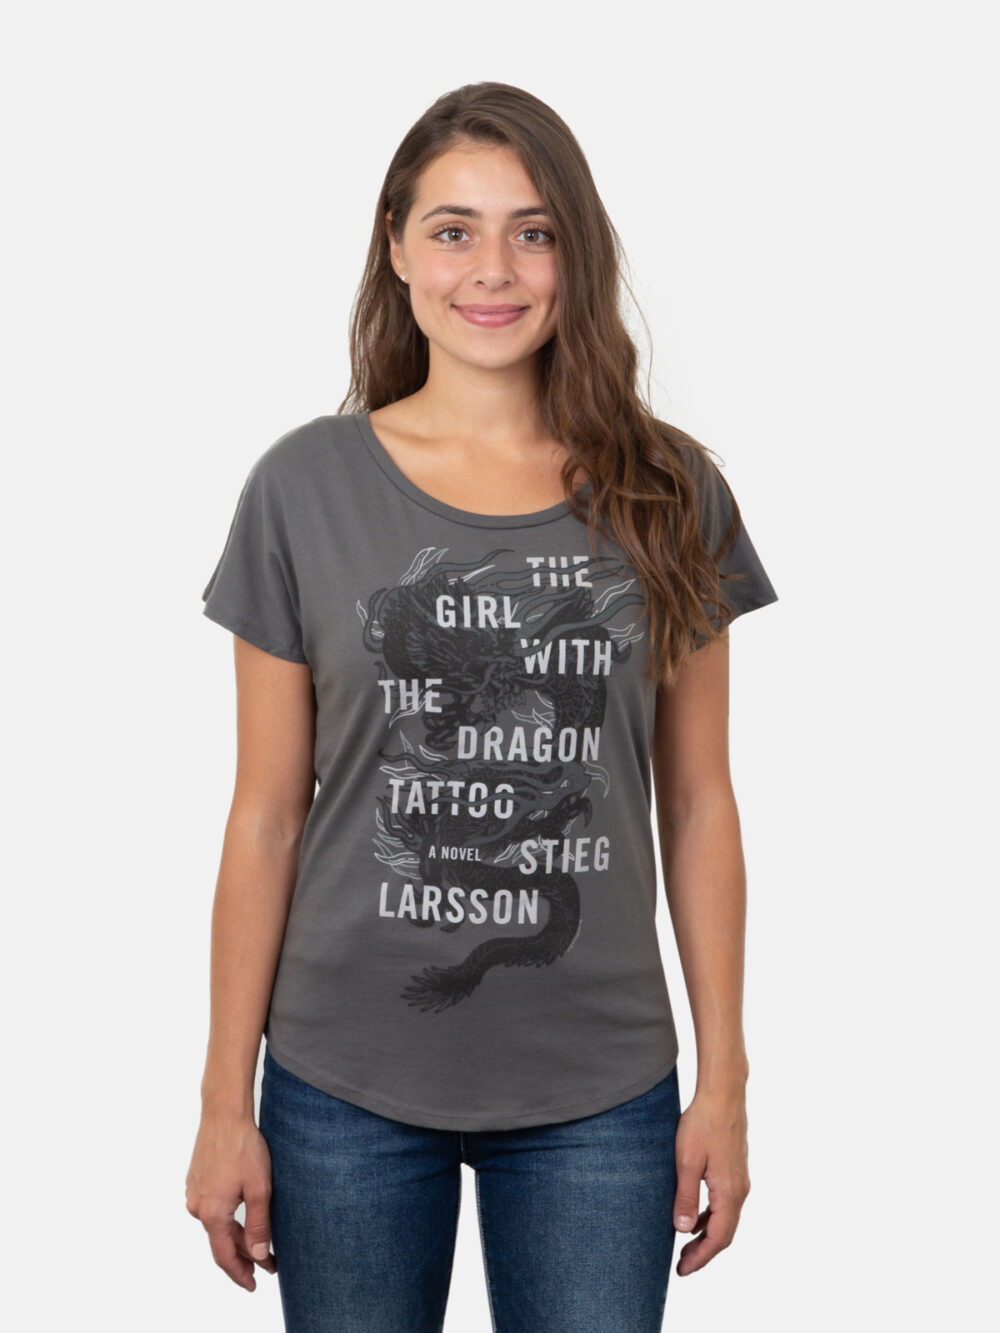 Girl with The Dragon Tattoo T-Shirt (Women's)